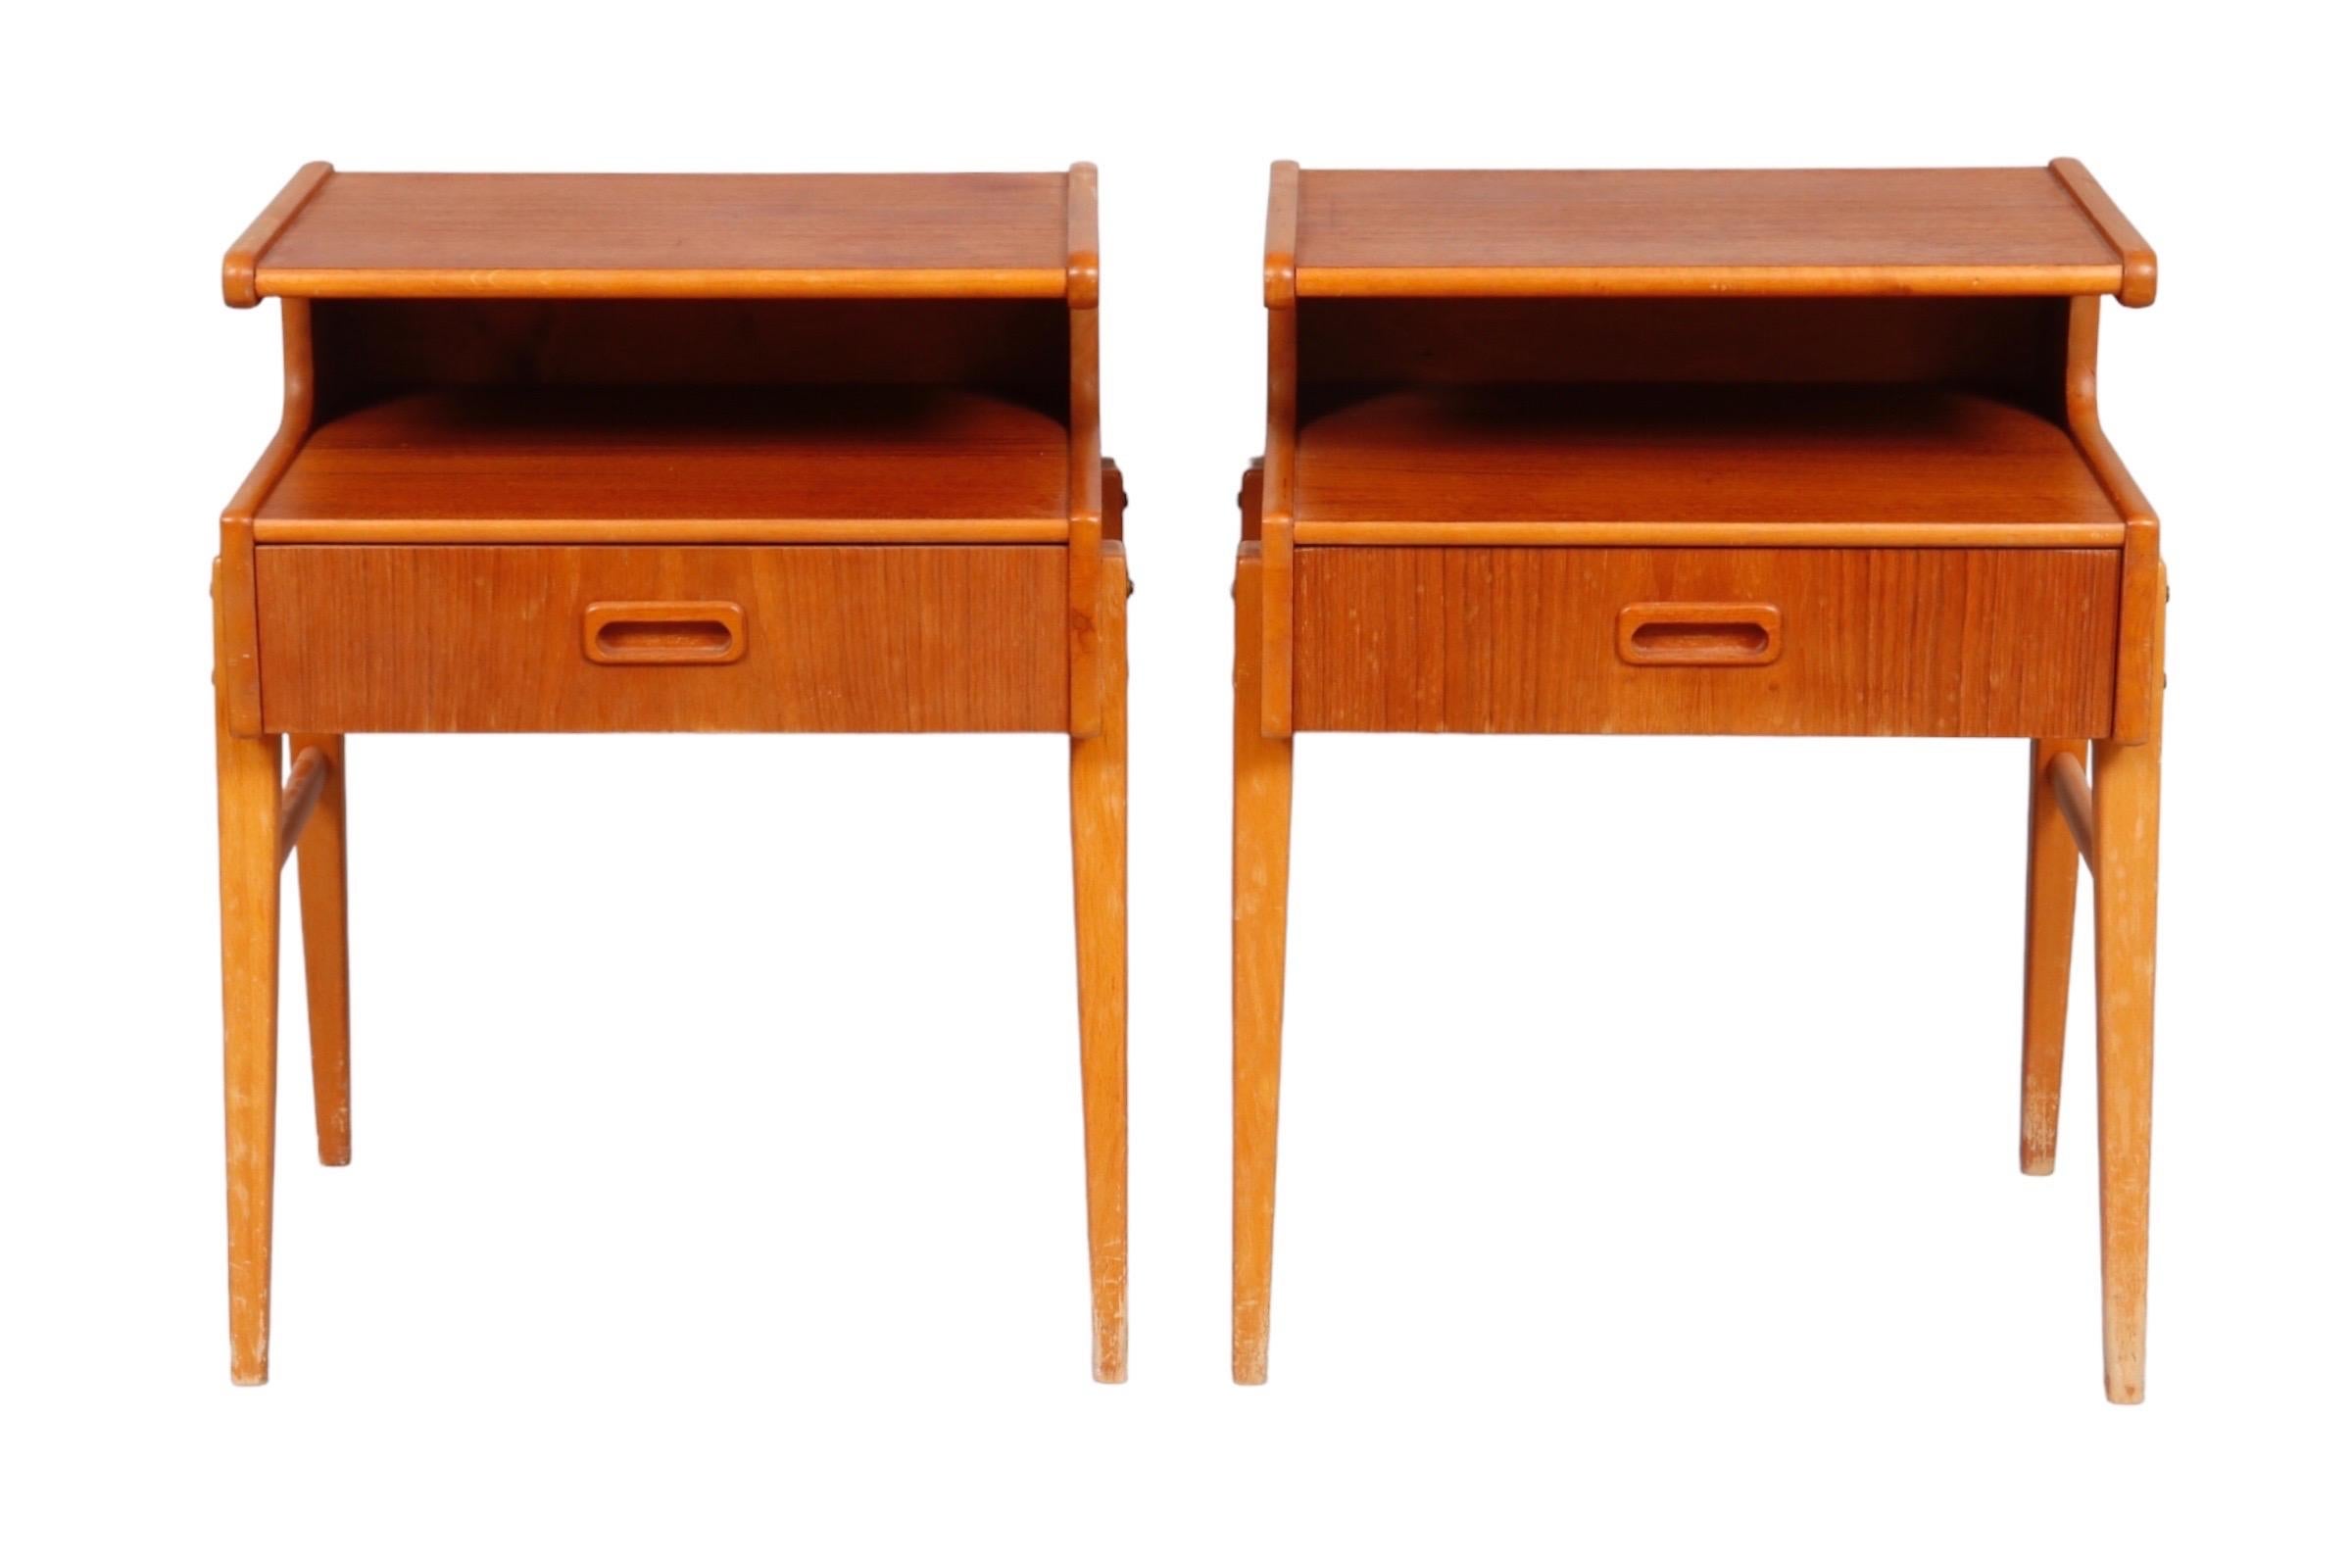 A pair of mid century nightstands. Frames are made of beech with teak veneer. Each has a small shelf above a single drawer that opens with a recessed handle.